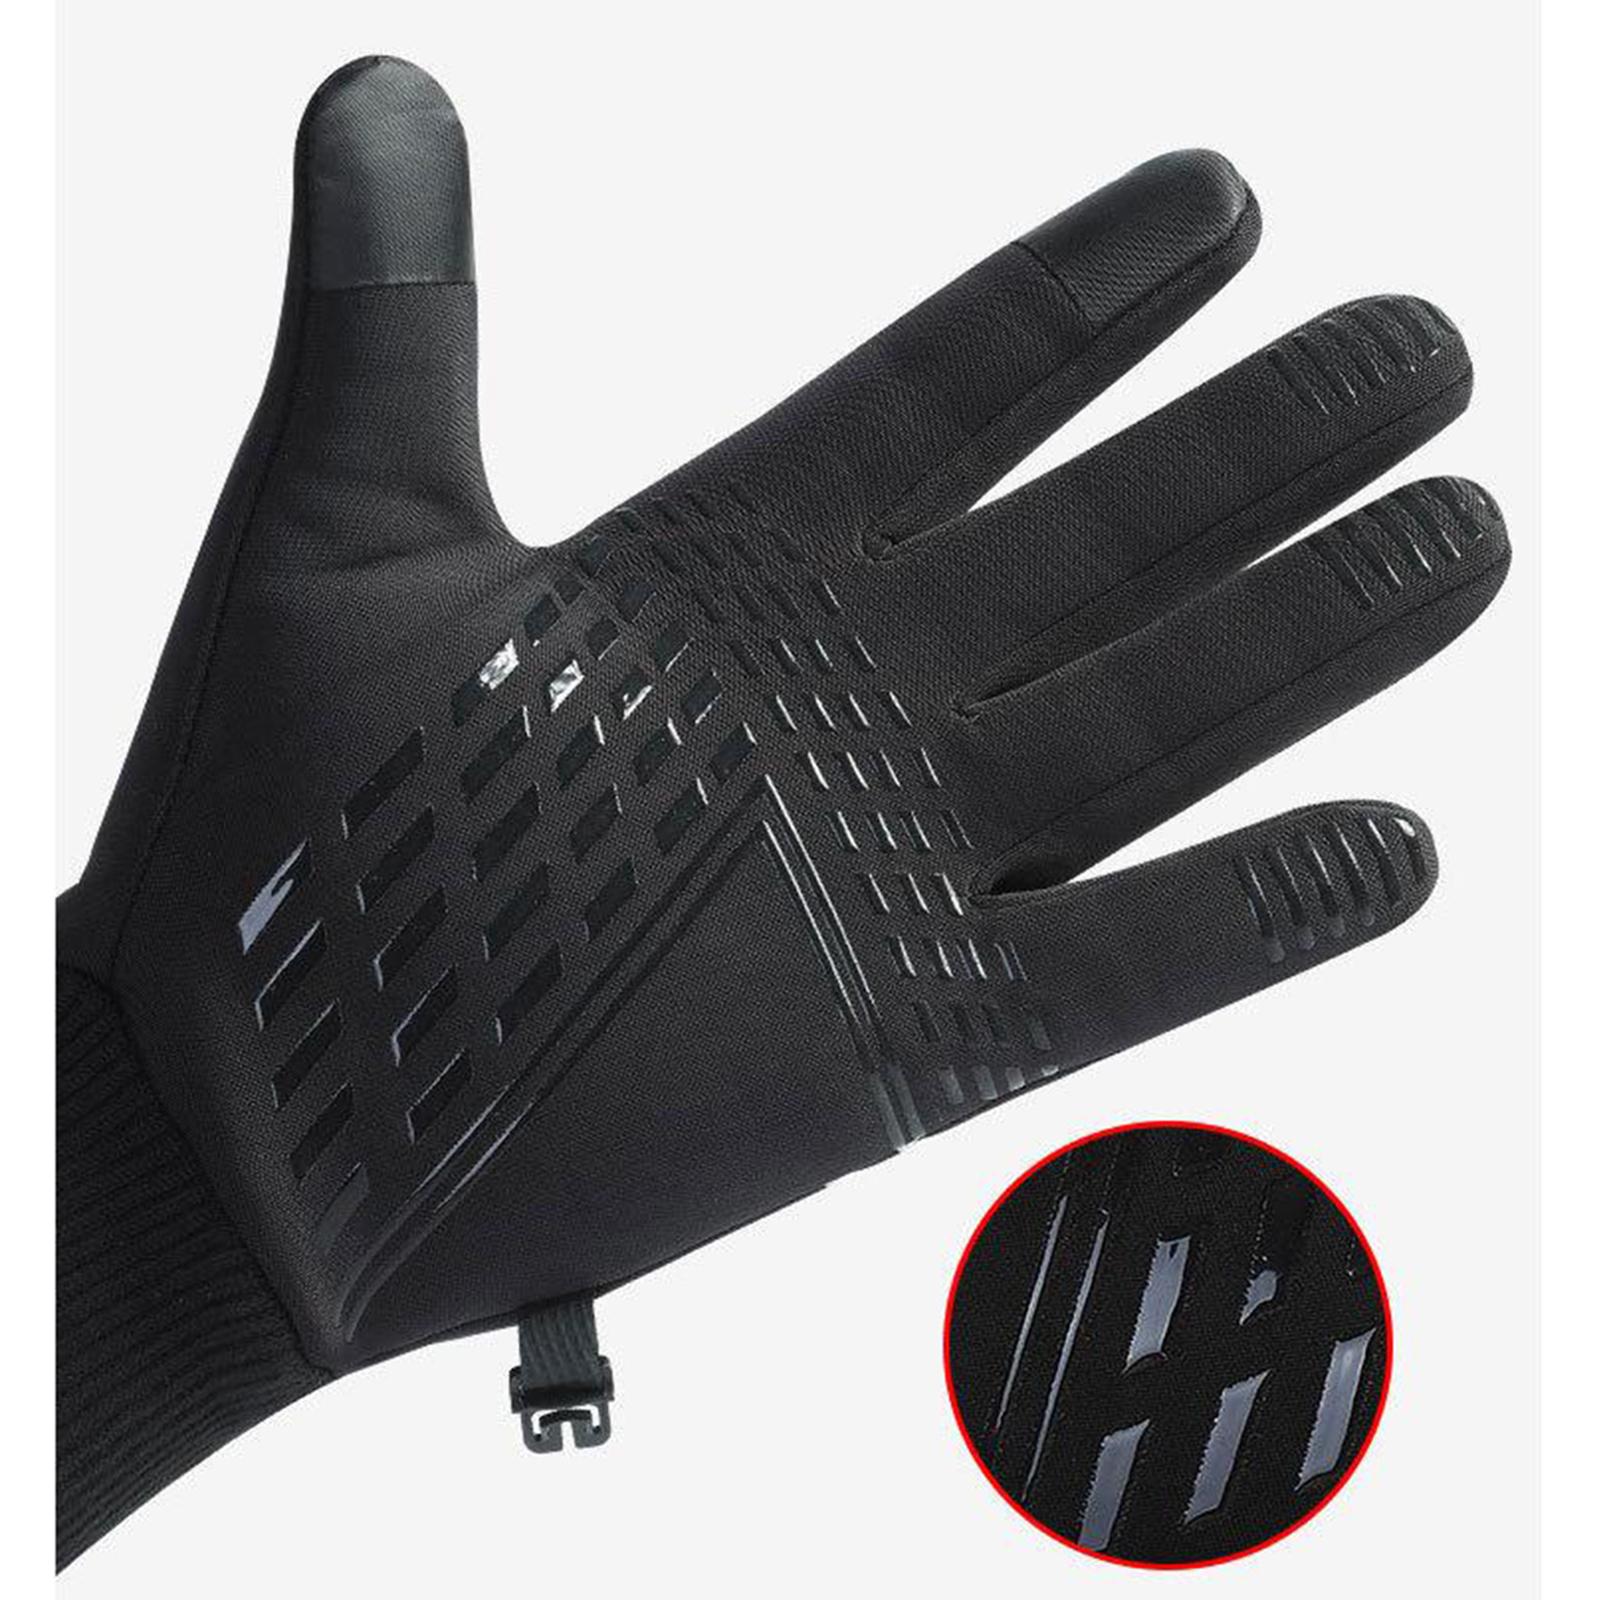 Winter Outdoor Cycling Hiking Sports Gloves Touch Screen L Black K111